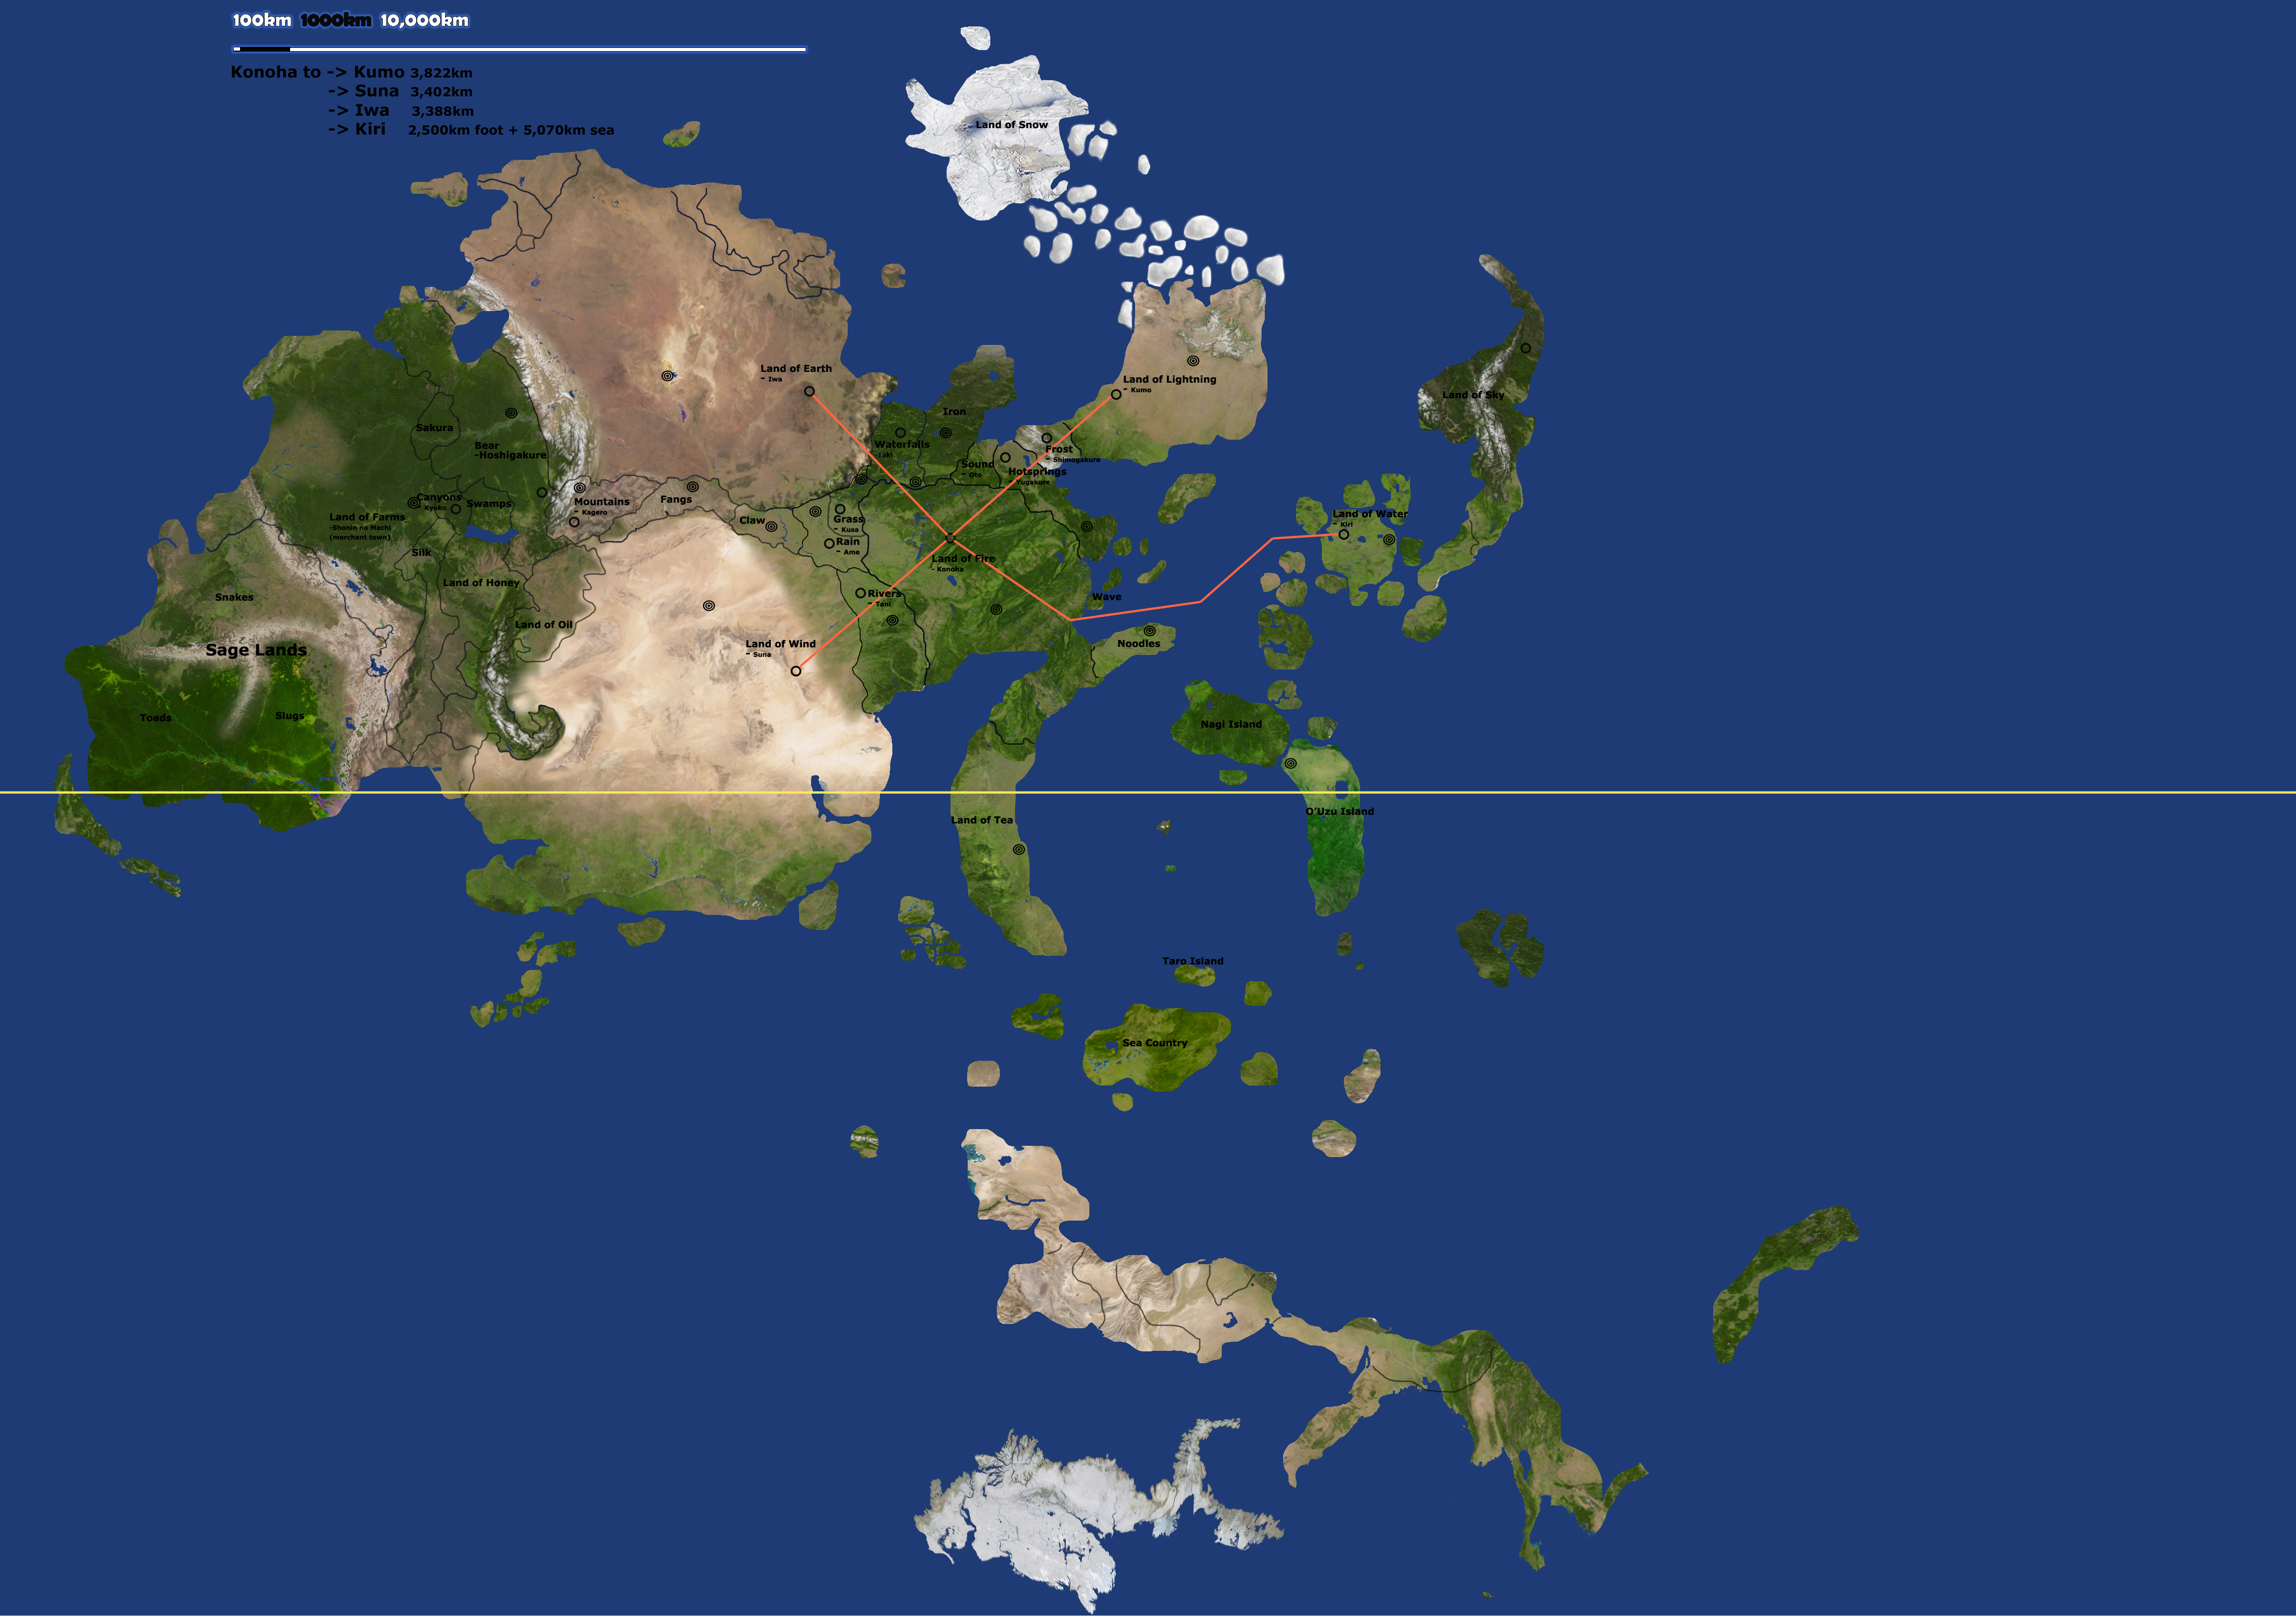 What's the best world map for the Naruto world? : r/NarutoFanfiction